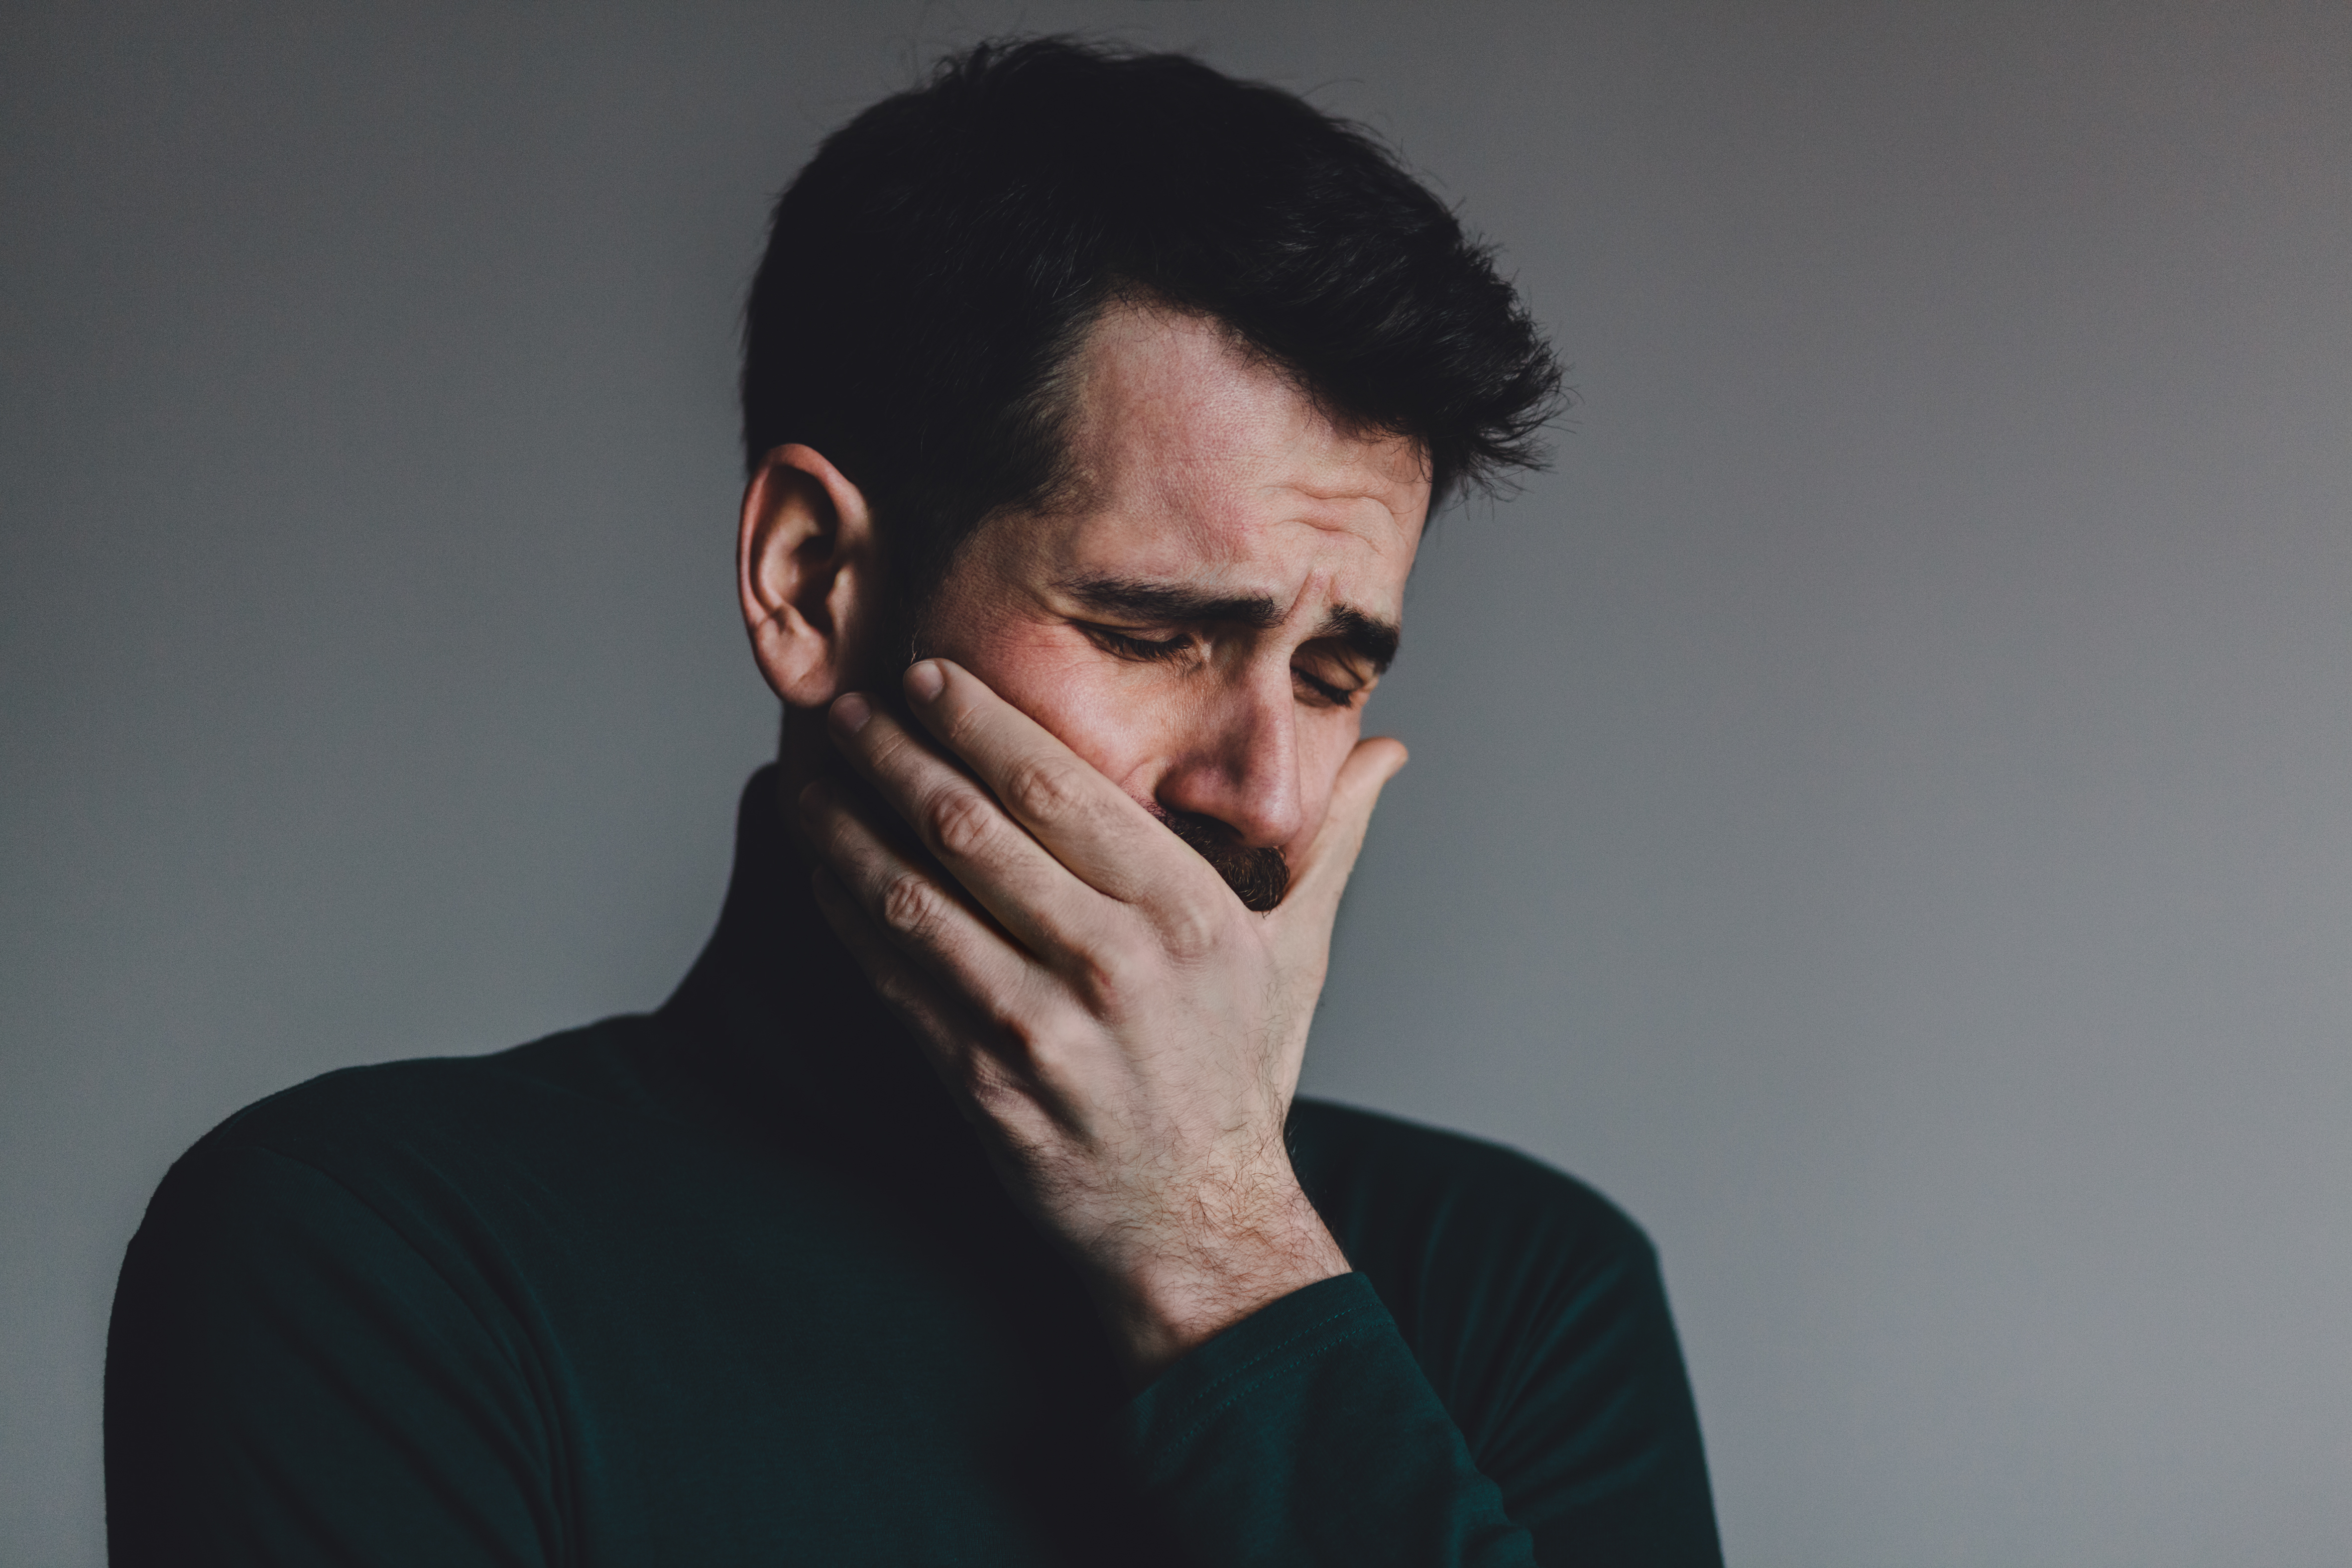 A man holding his mouth as he cries | Source: Shutterstock